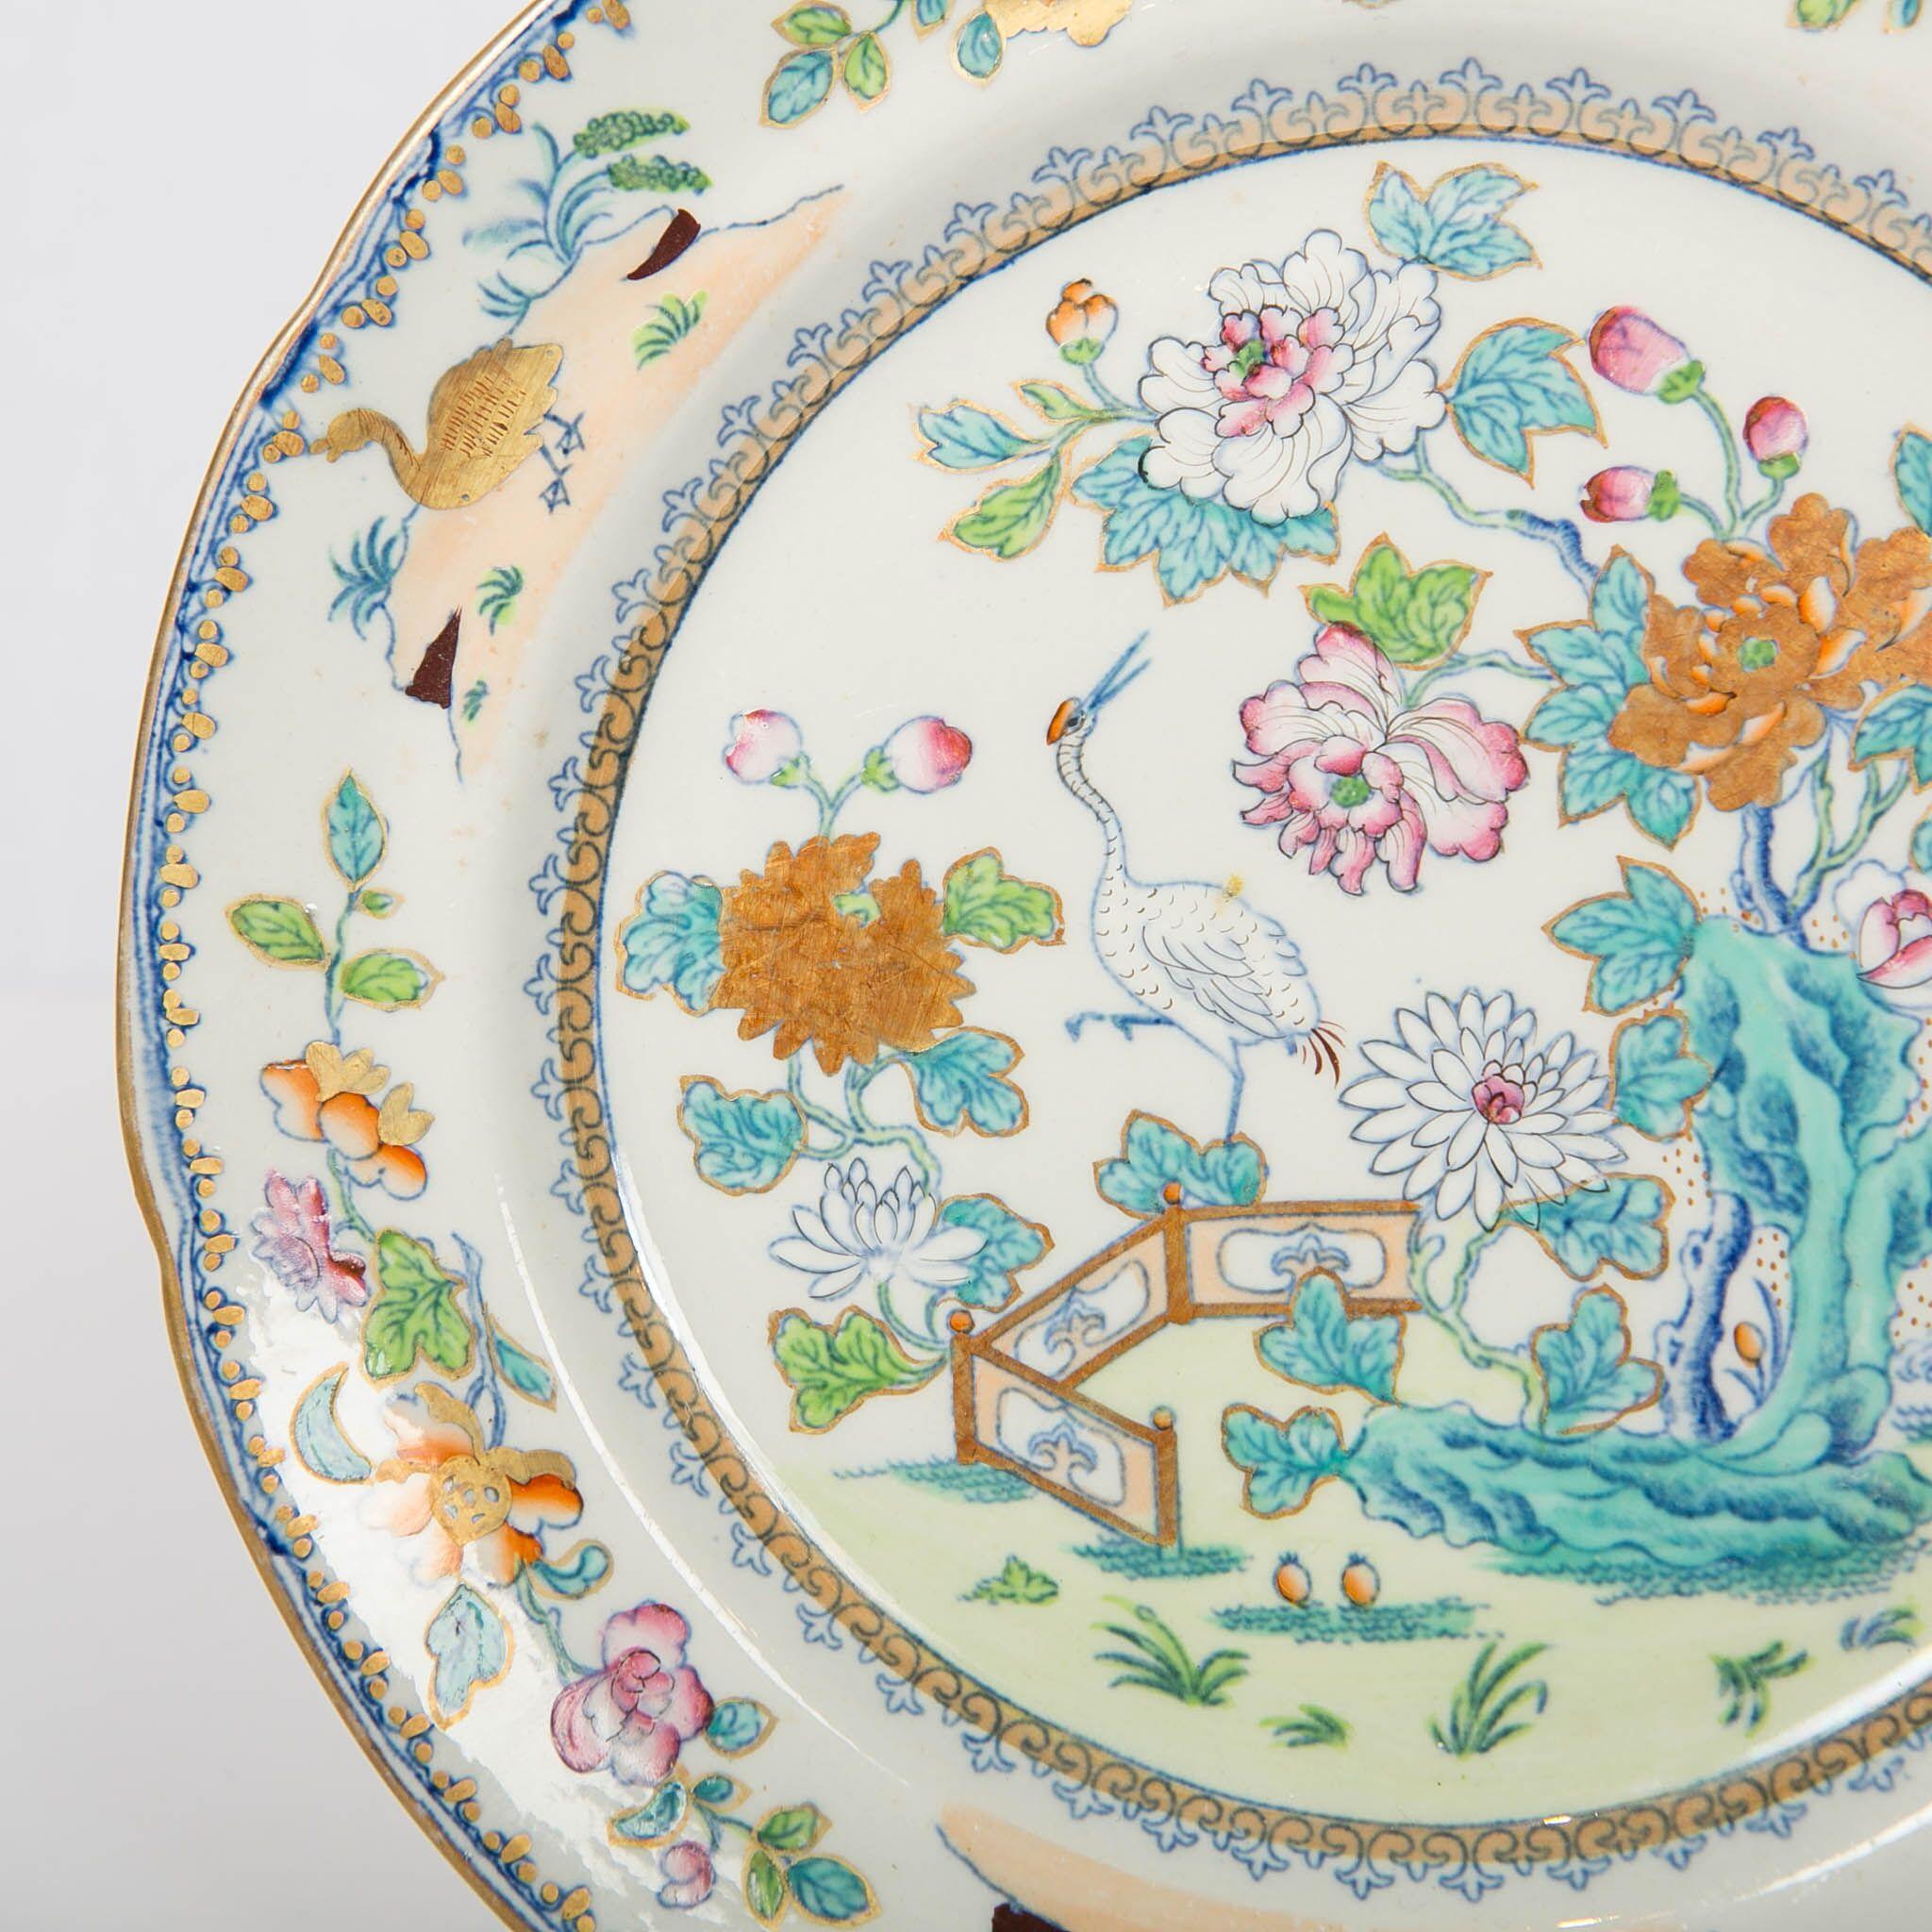 19th Century Pair of Davenport Plates with a Chinoiserie Design Turquoise and Pink